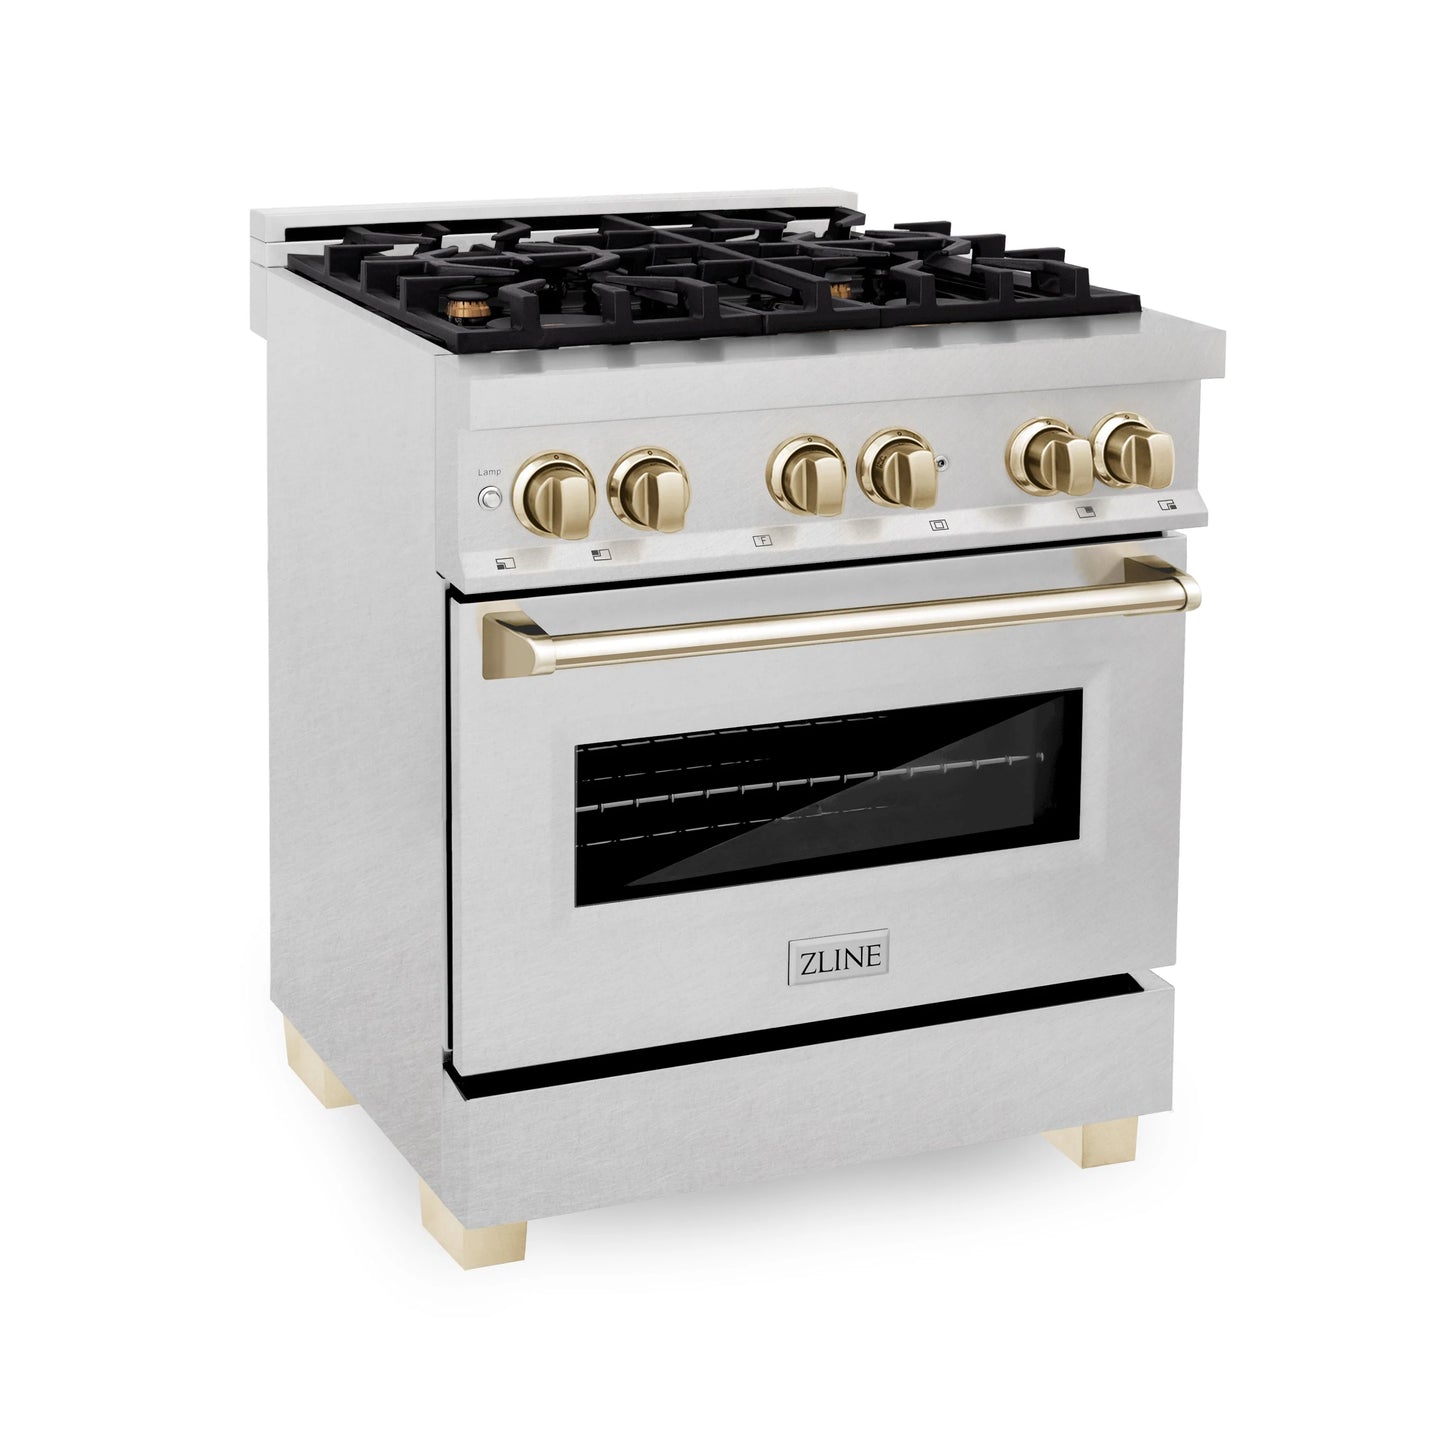 ZLINE Autograph Edition 30 in. Dual Fuel Range in DuraSnow Steel with Gold Accents (RASZ-SN-30-G)